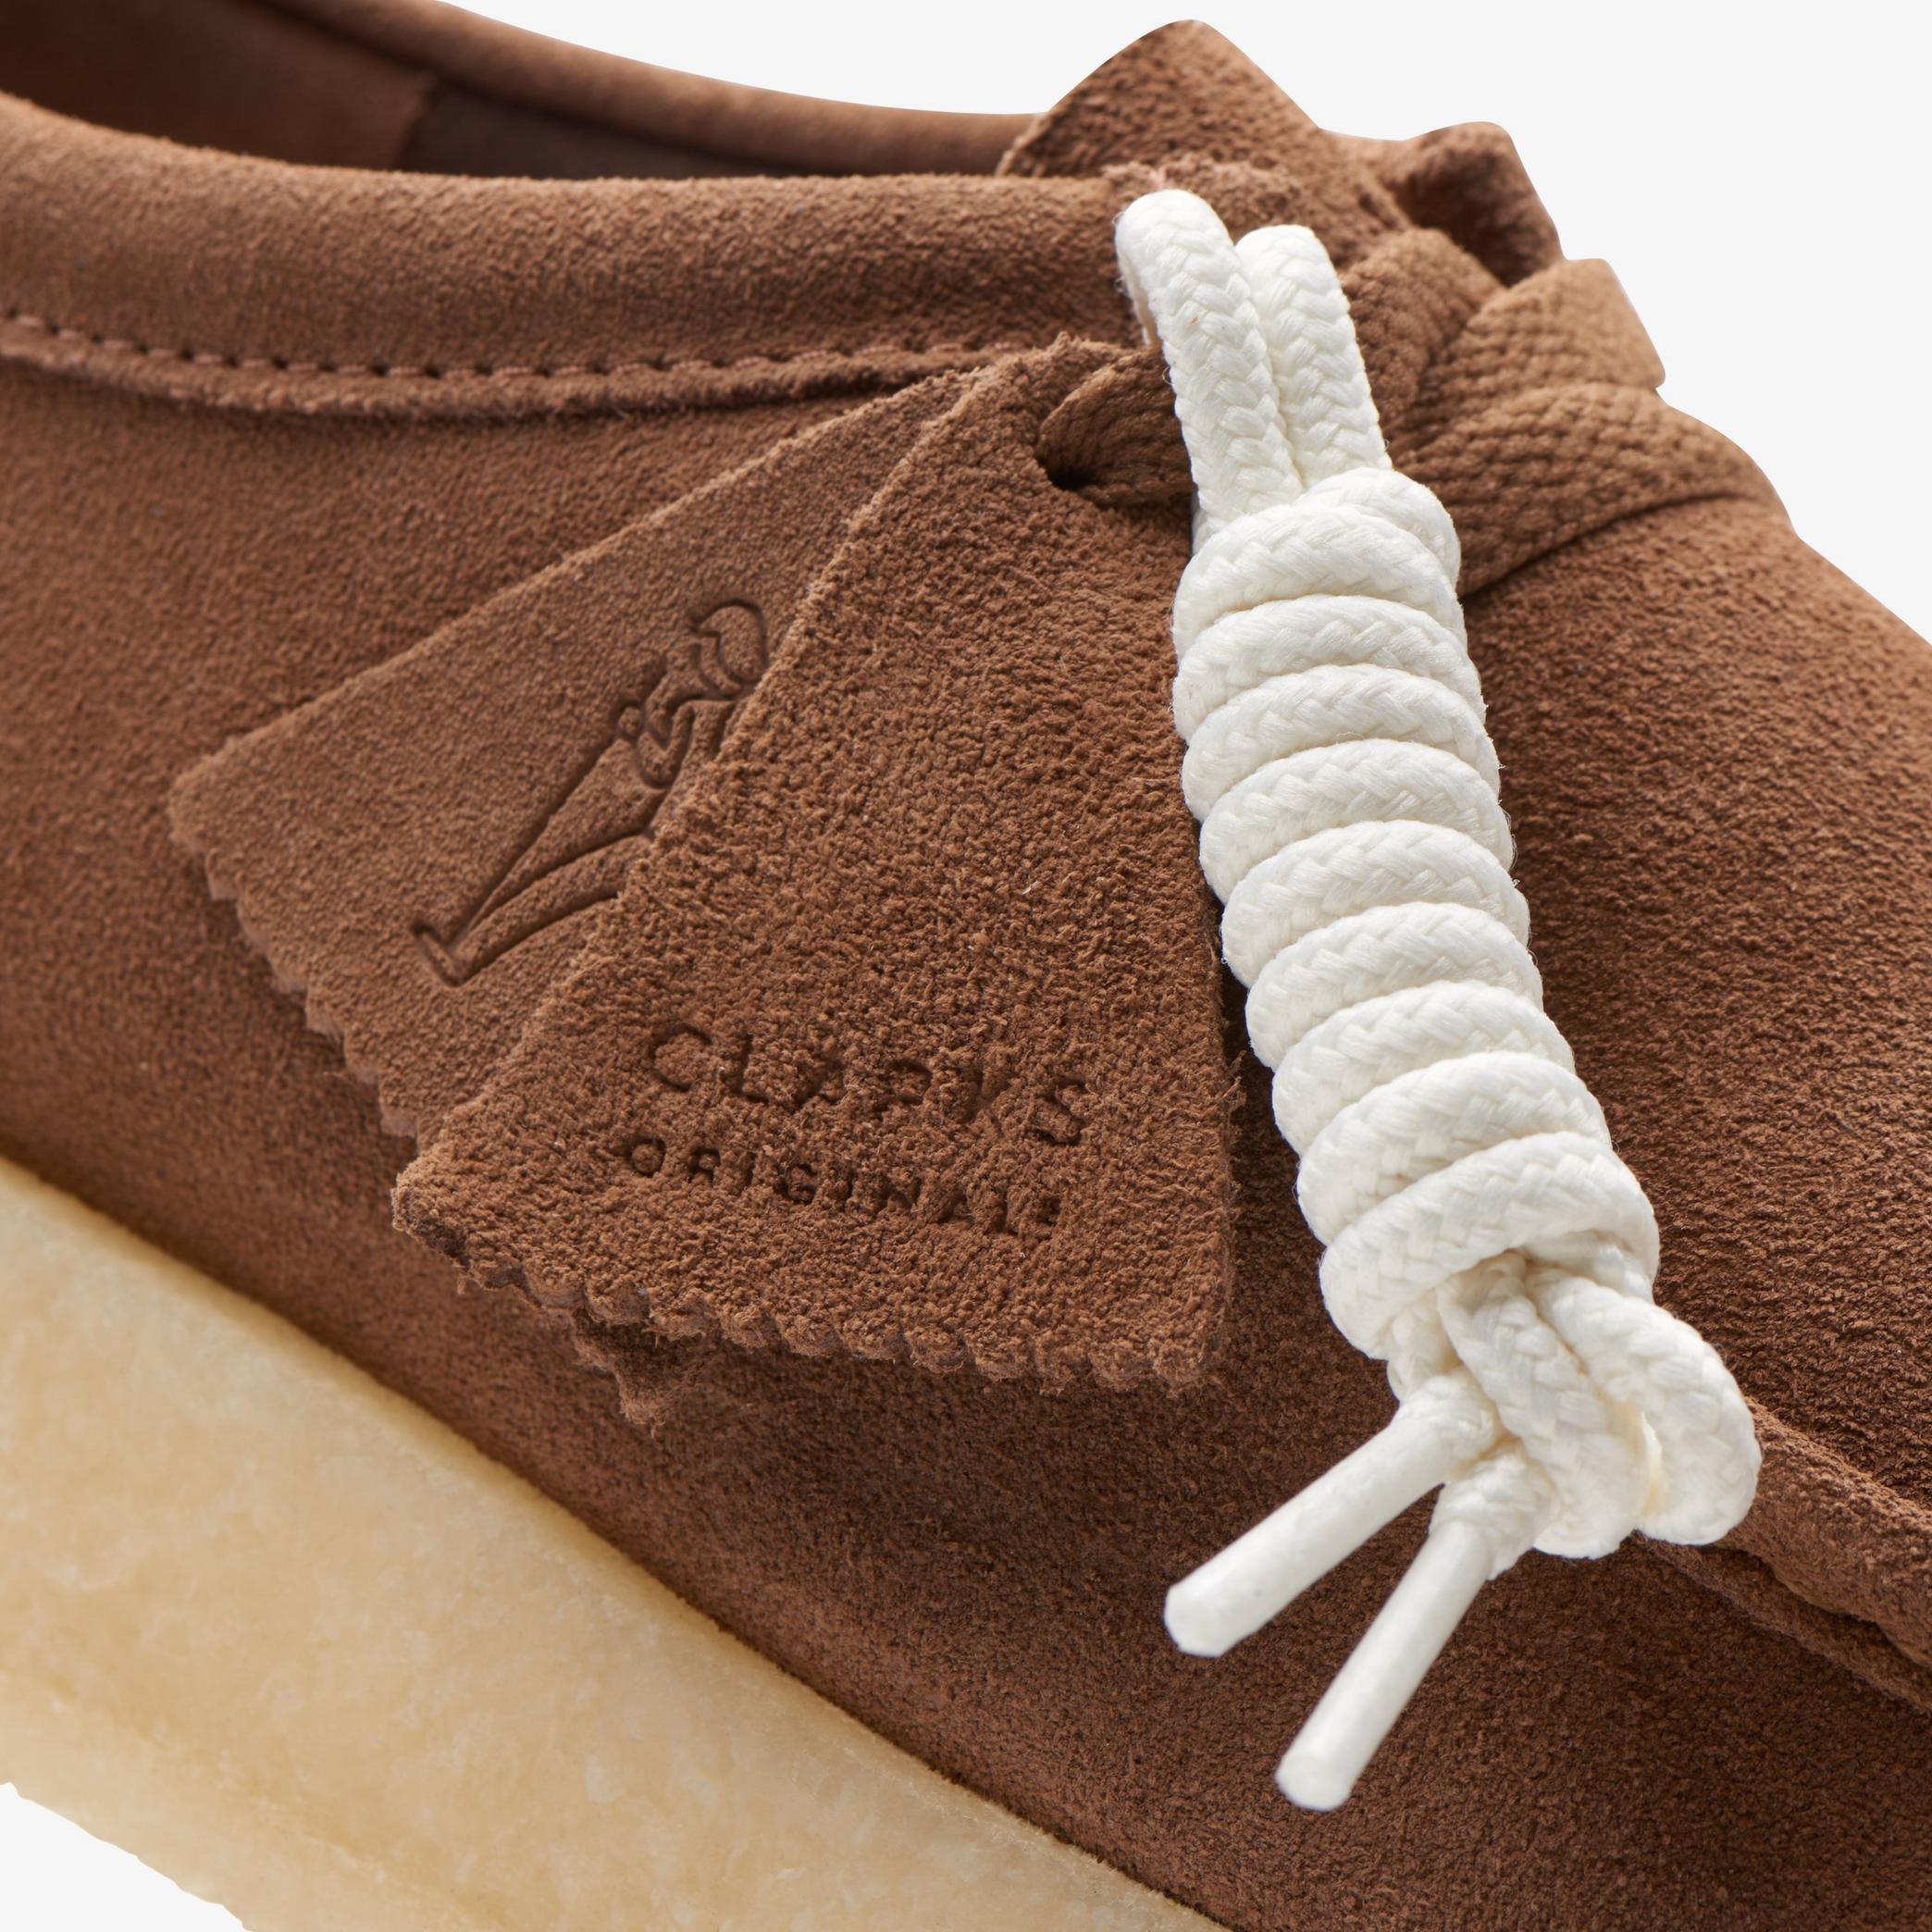 Rossendale Cola Suede Moccasins, view 7 of 7